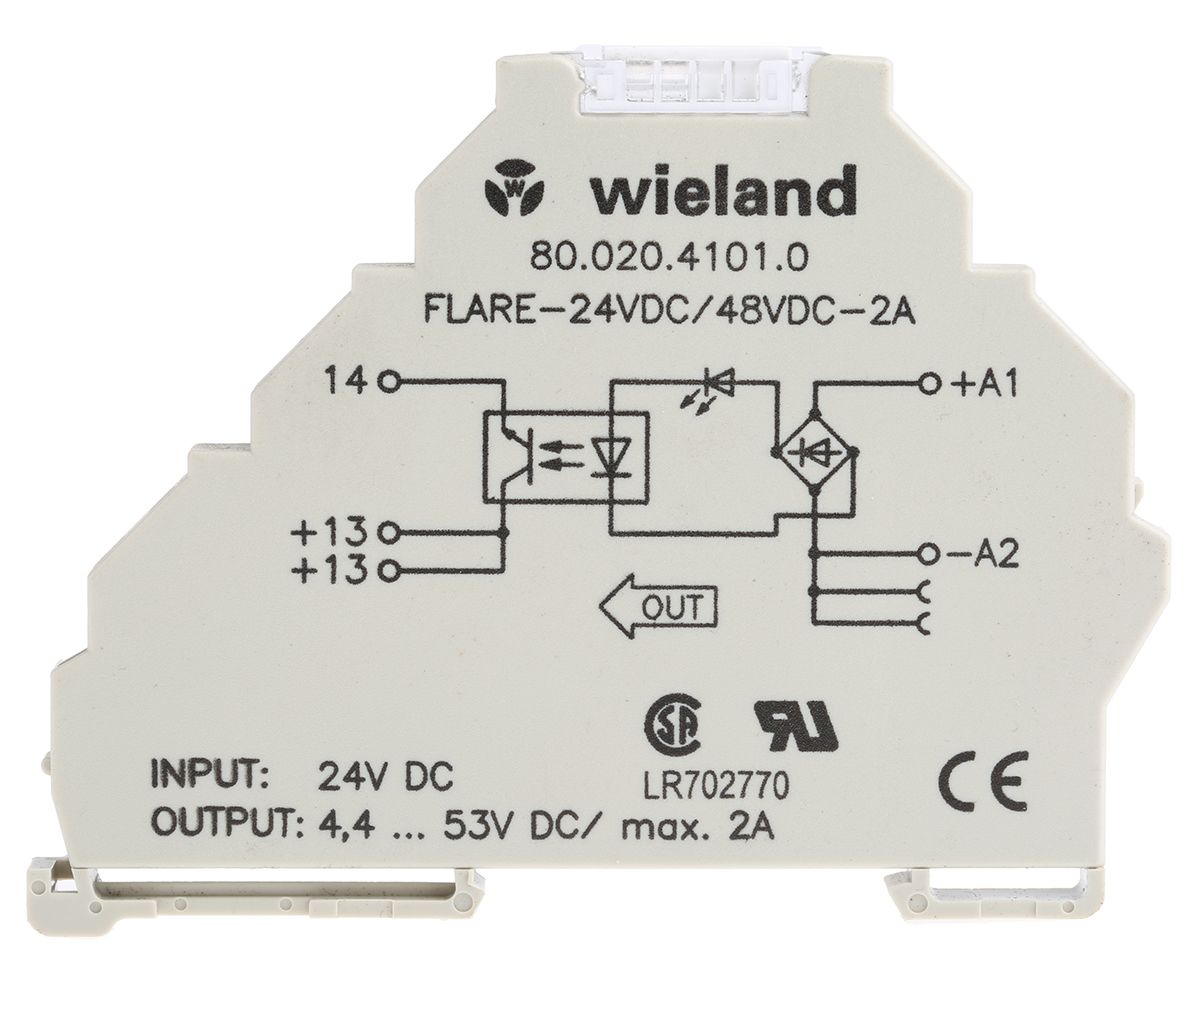 Wieland DIN Rail Solid State Relay, 2 A Max. Load, 53 V Max. Load, 53 V Max. Control